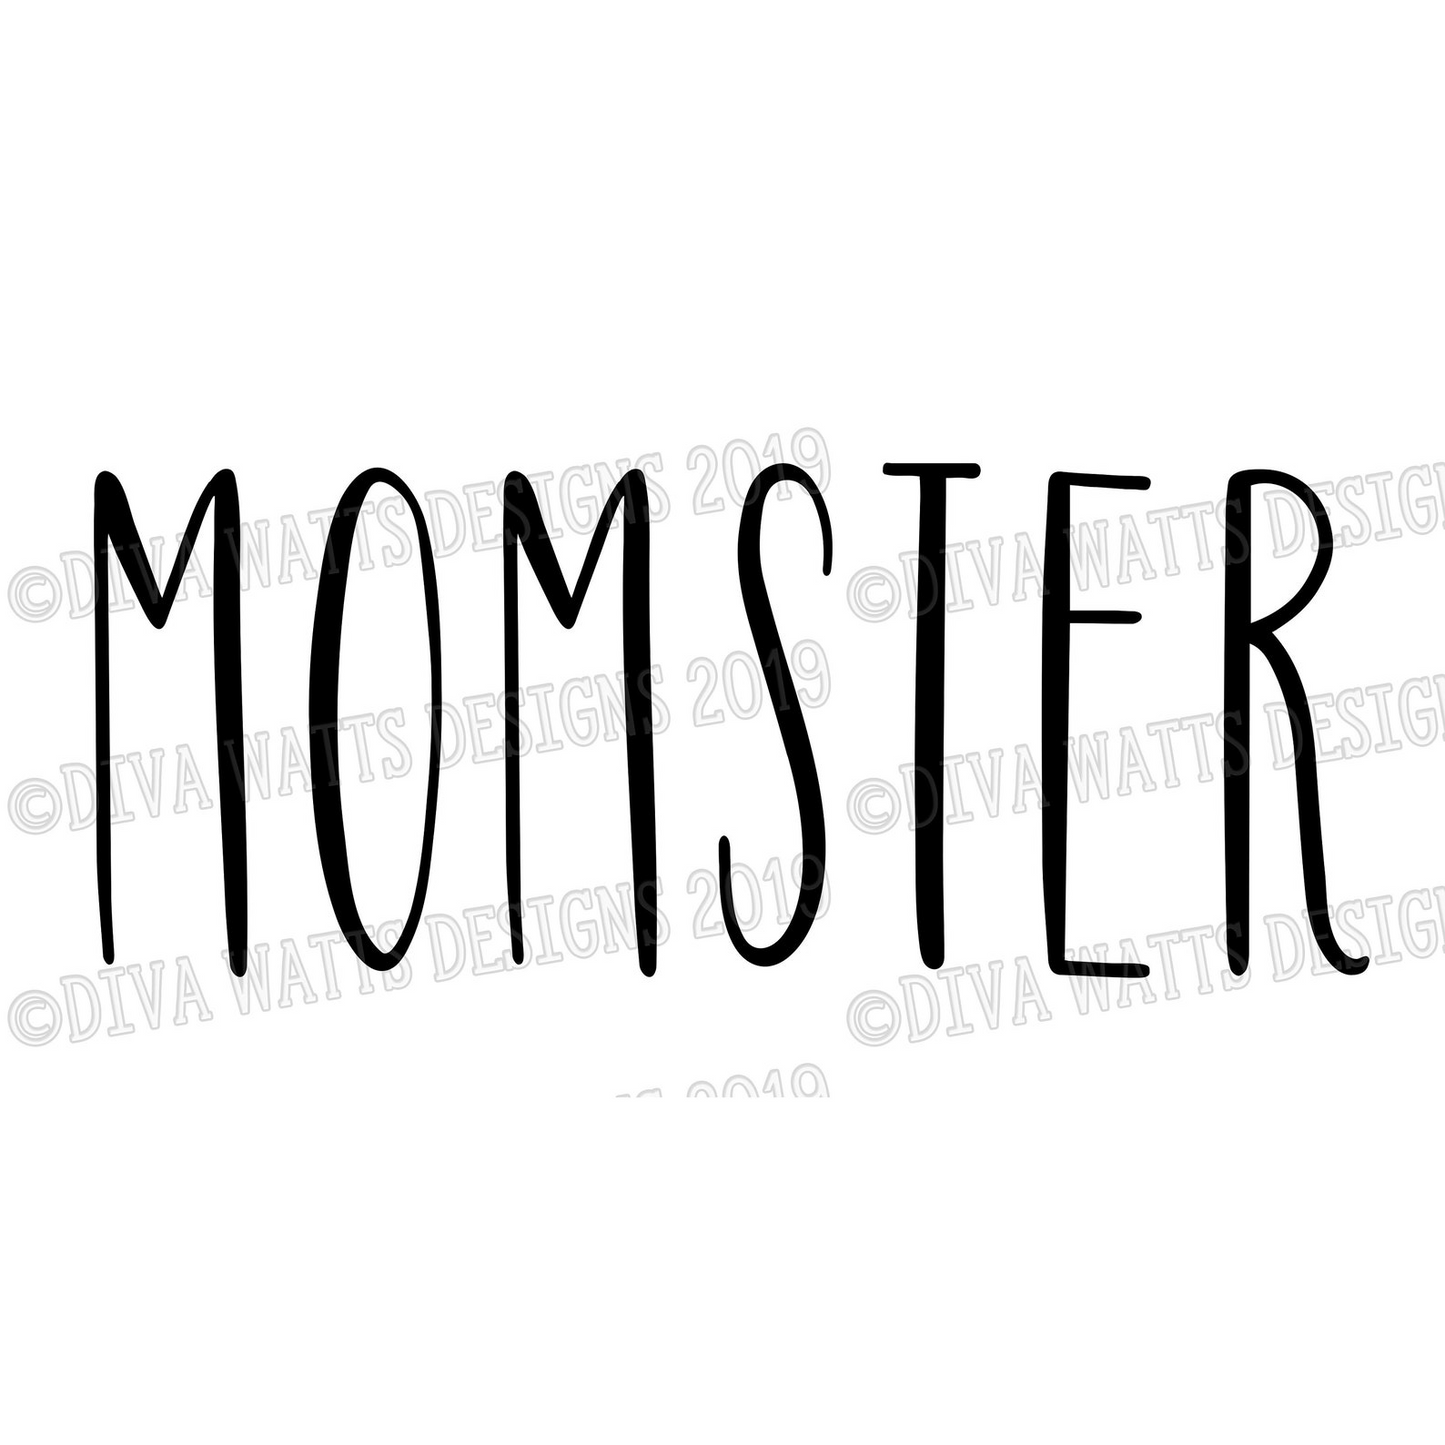 SVG Momster | Halloween Cutting File | Monster | Instant Download | PNG DXF jpg | T-Shirt | Vinyl Stencil htv | Fall | Skinny Long Letters